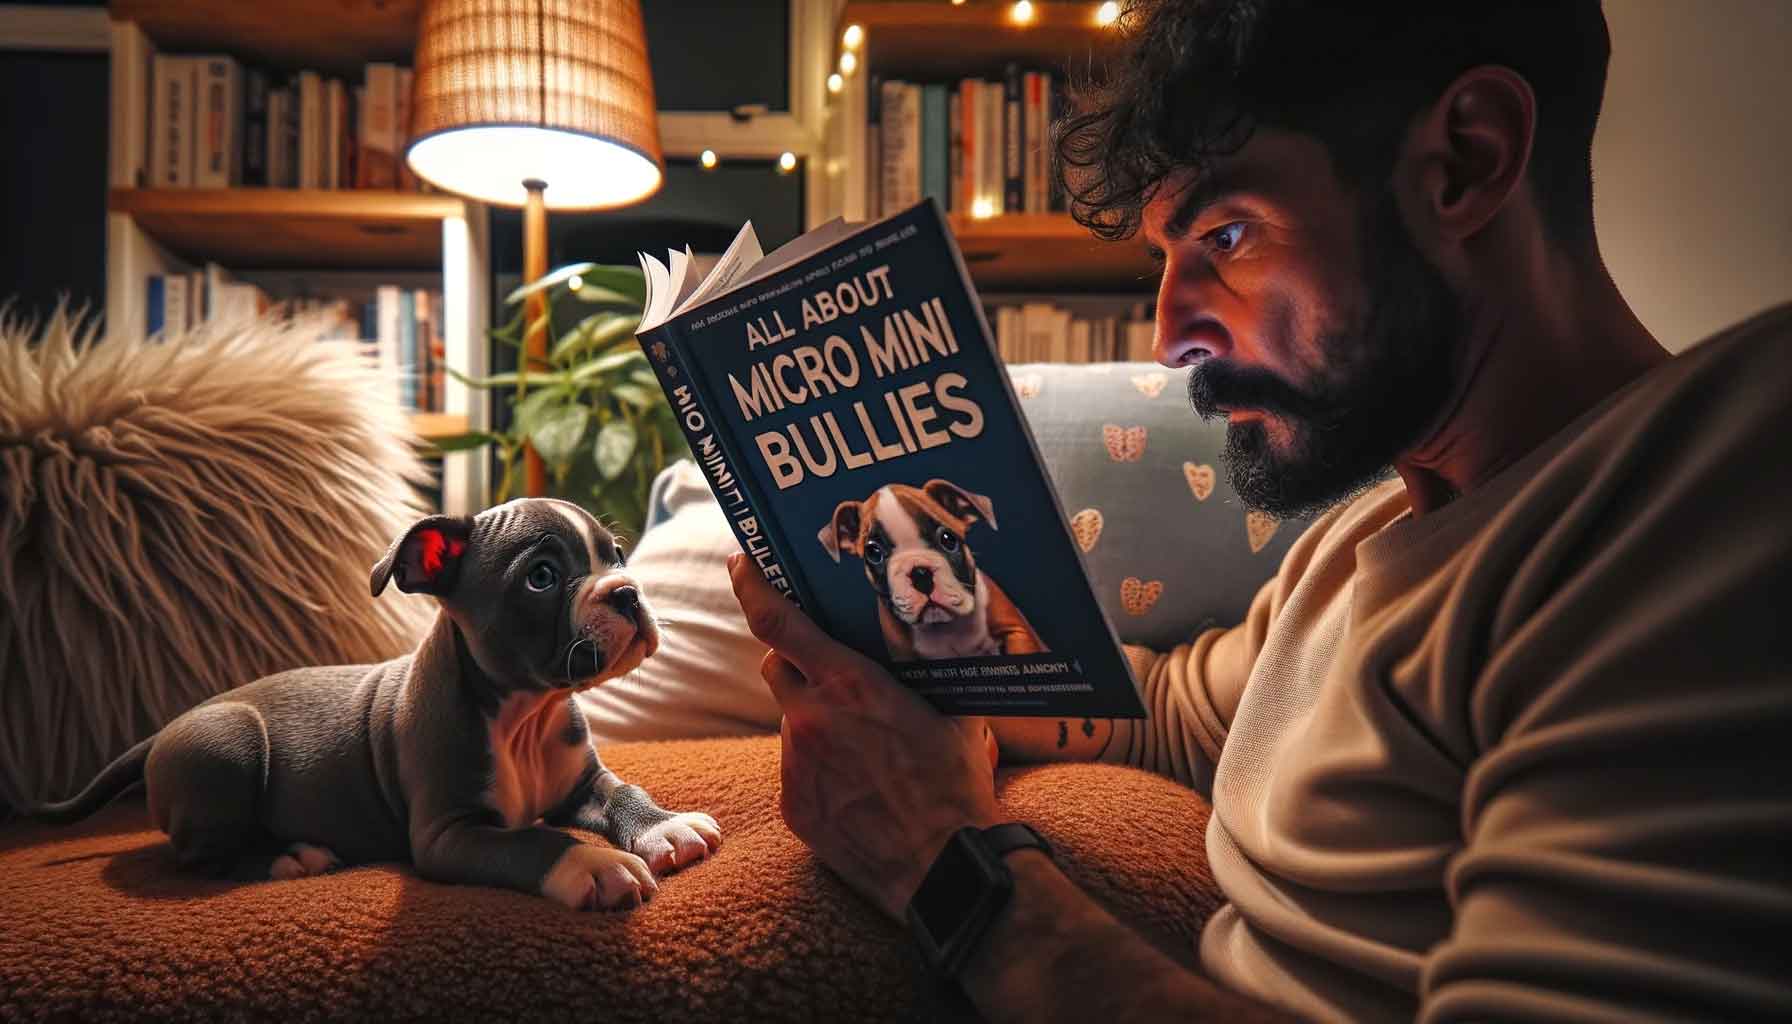 An individual engrossed in a book titled 'All About Micro Mini Bullies', with a curious micro mini bully peering at the book in a cozy living room setting.